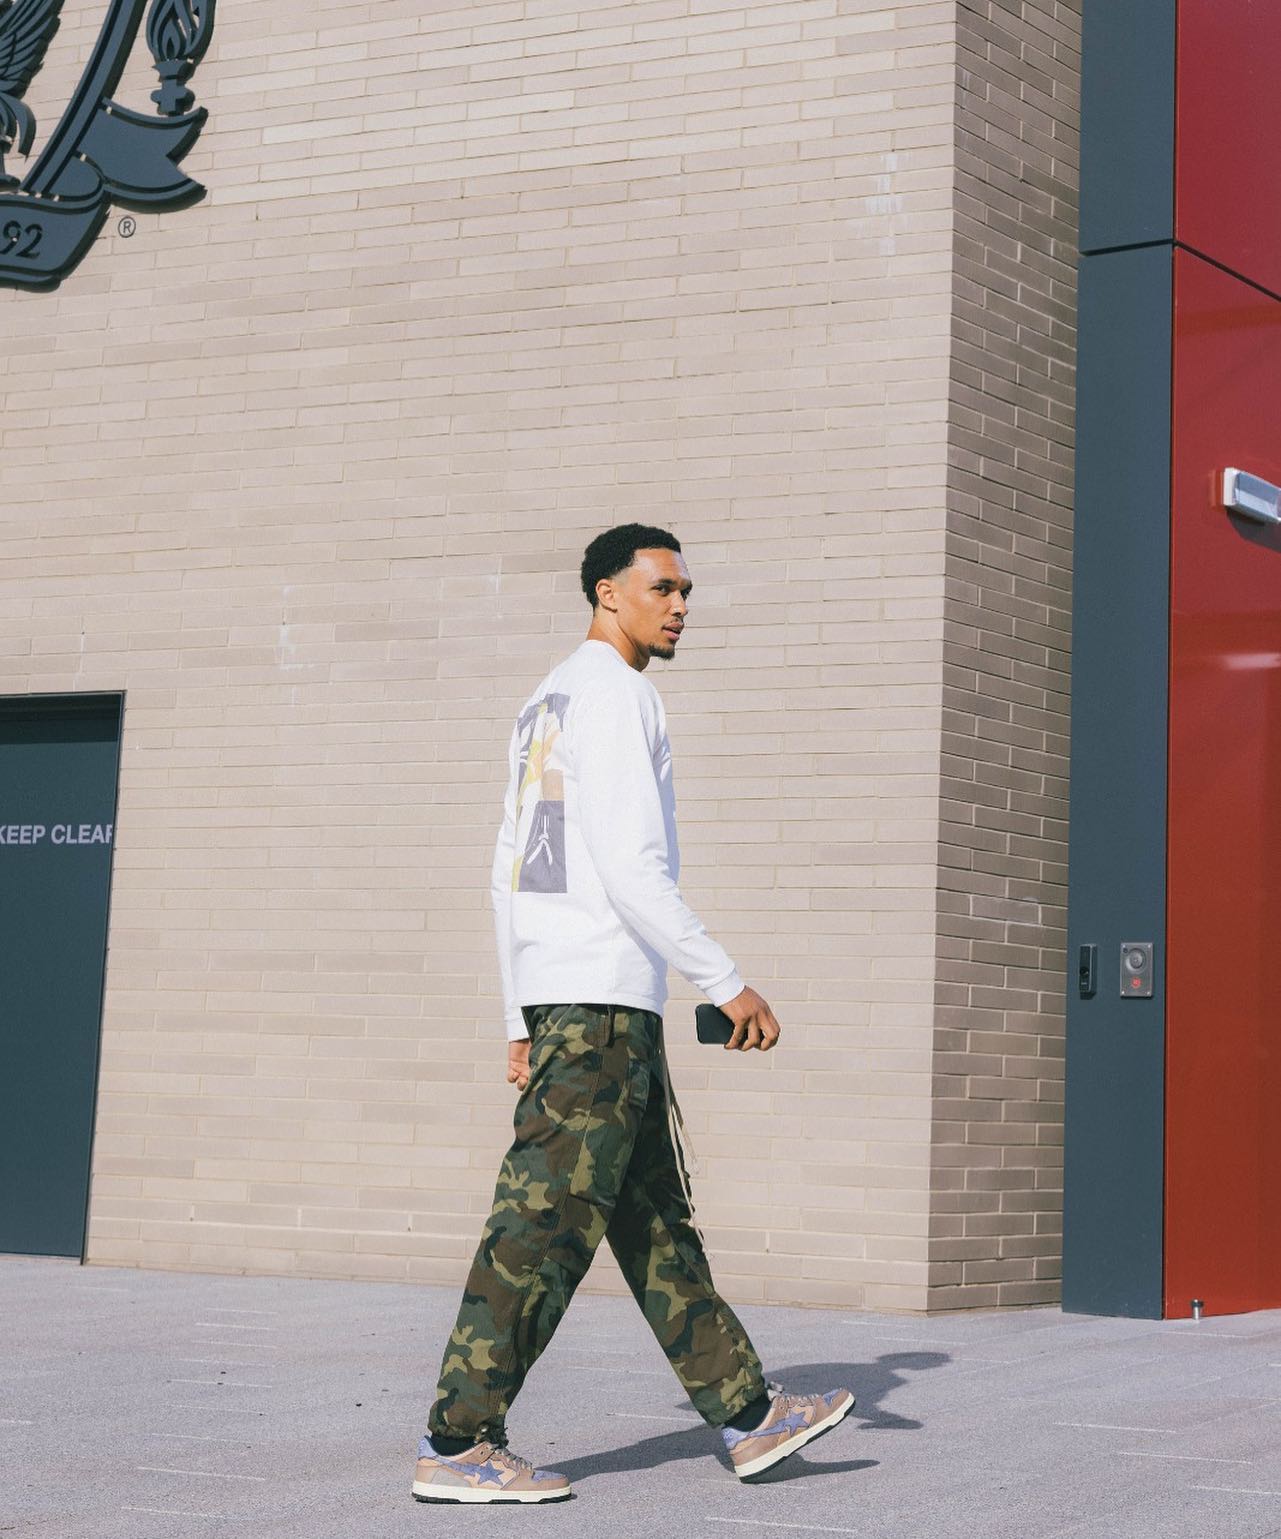 Admire the CLASSY fashion of Alexander-Arnold - one of Liverpool’s most ...